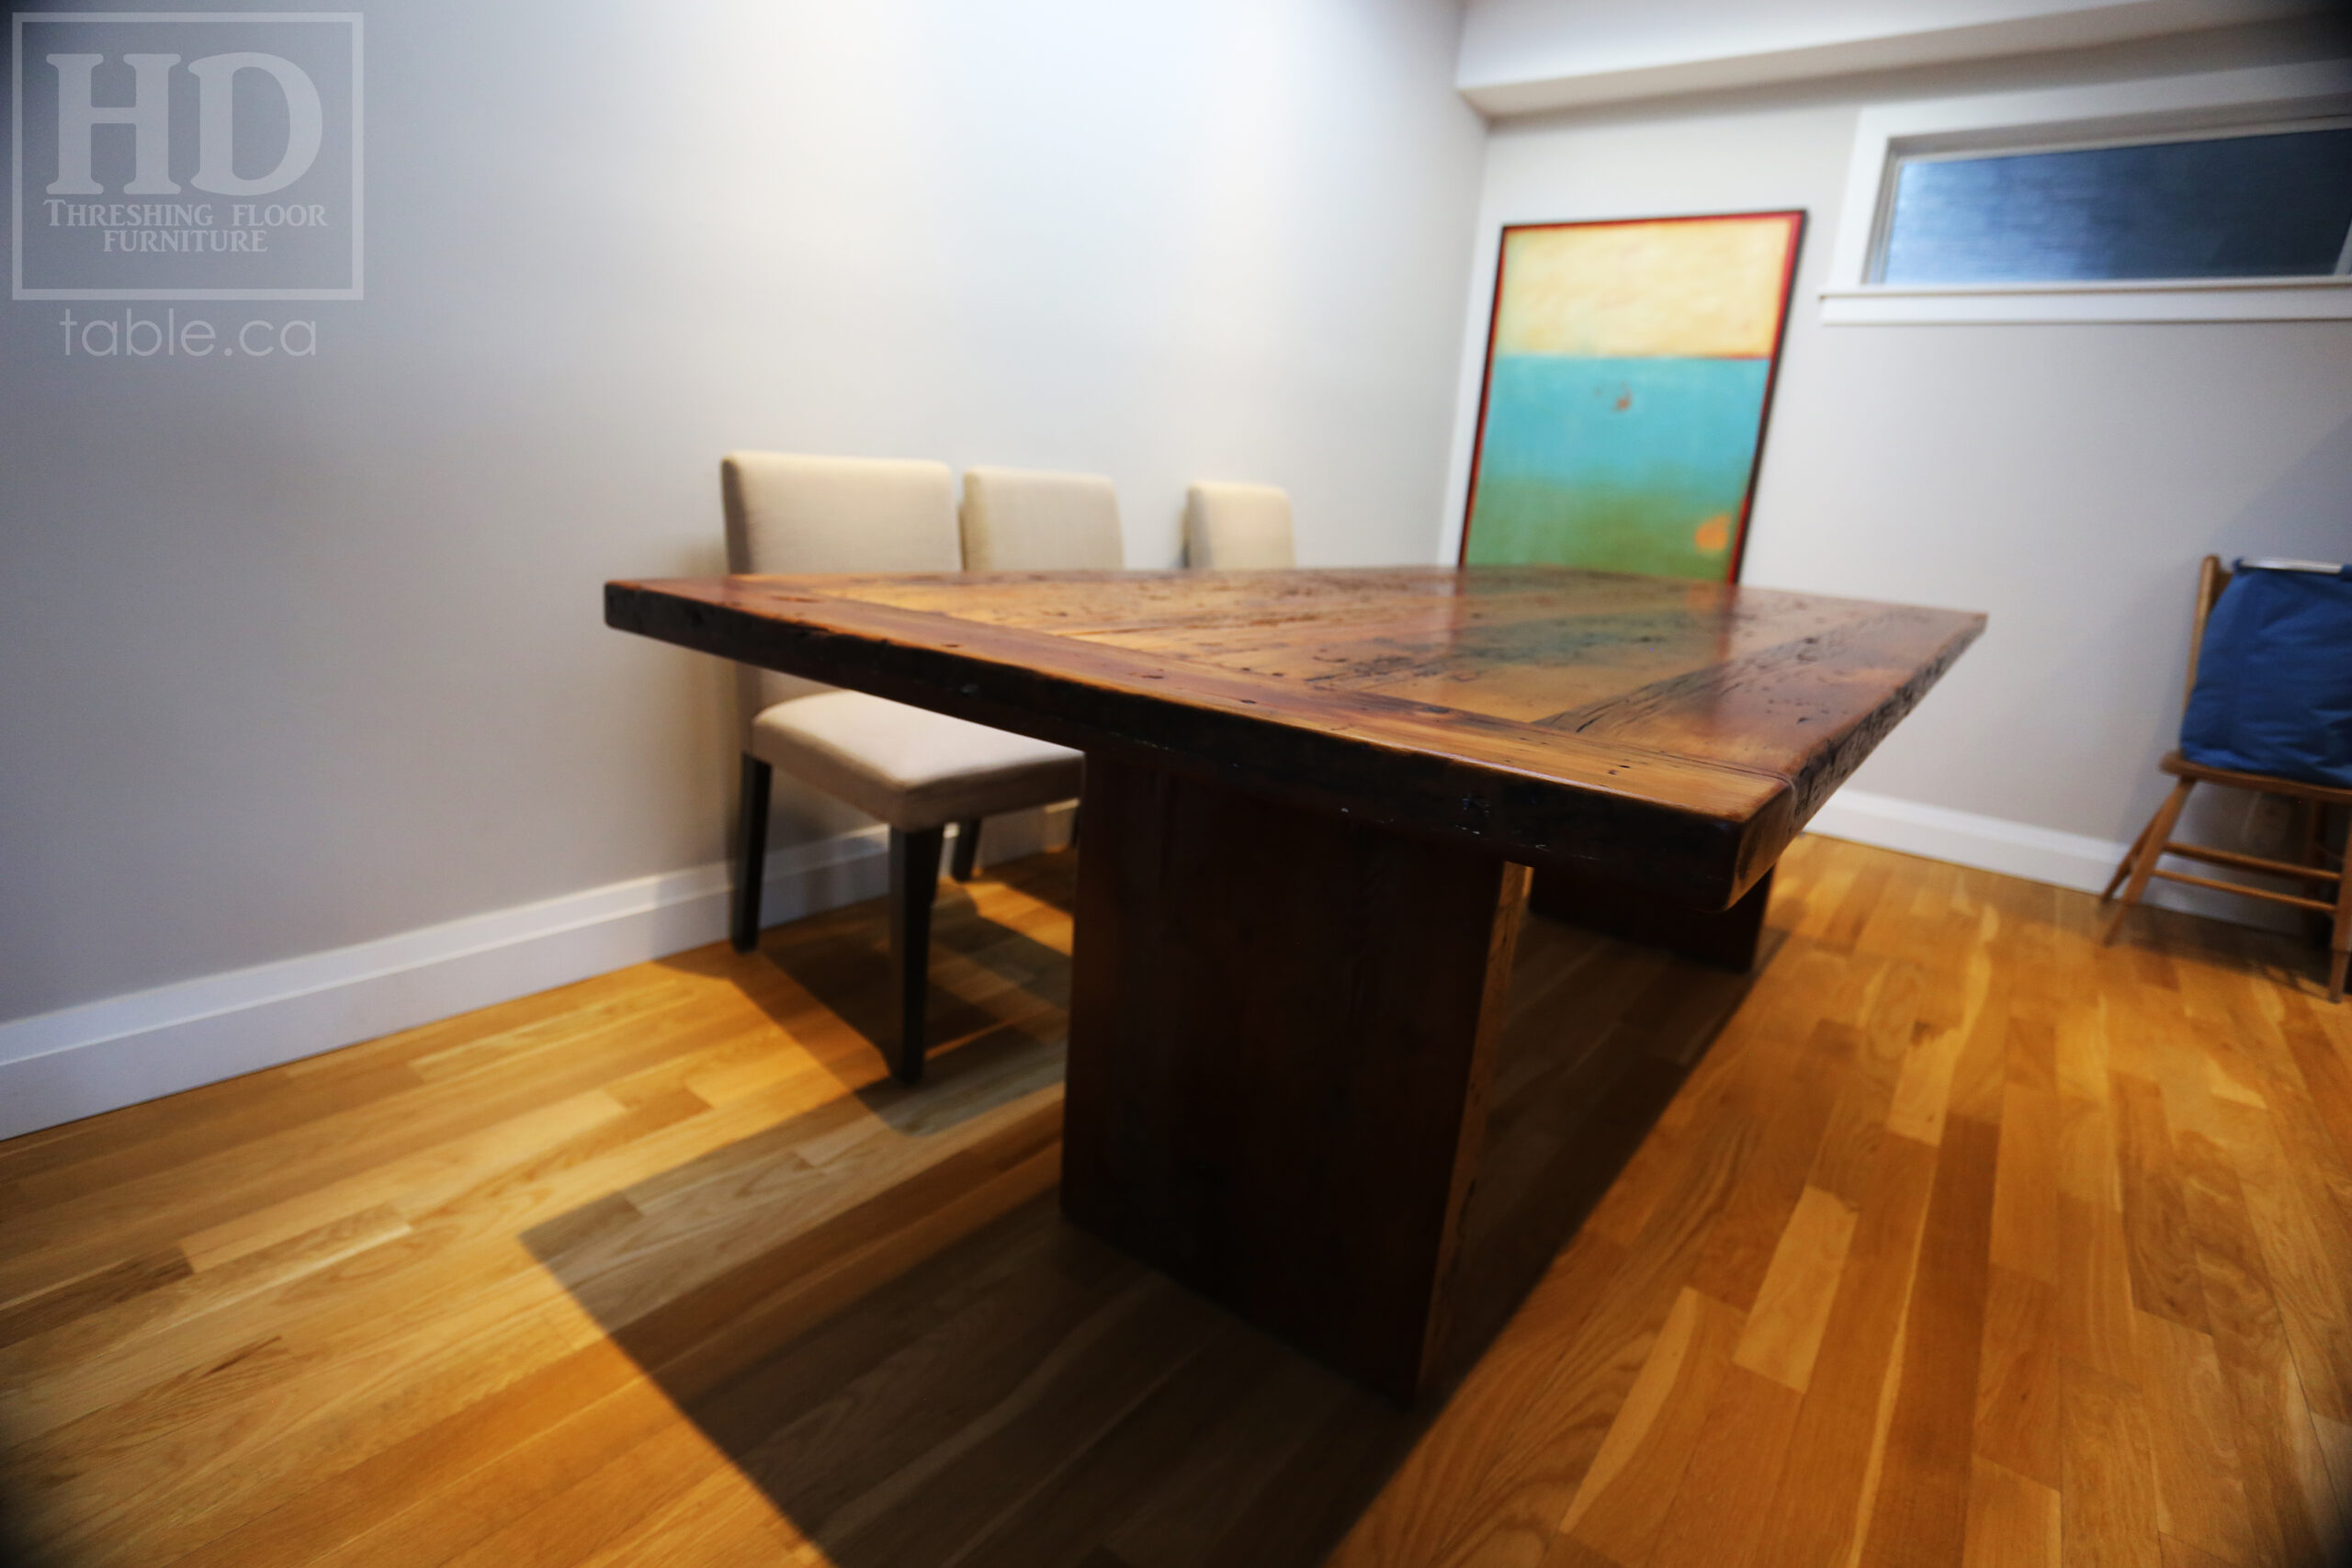 8' Ontario Barnwood Wood Table we made for an Oakville, Ontario home - 39" wide â€“ Modern Plank Base â€“ Reclaimed Old Growth Hemlock Threshing Floor Construction - Original edges & distressing maintained â€“ Satin polyurethane finish [no epoxy filling] â€“ www.table.ca